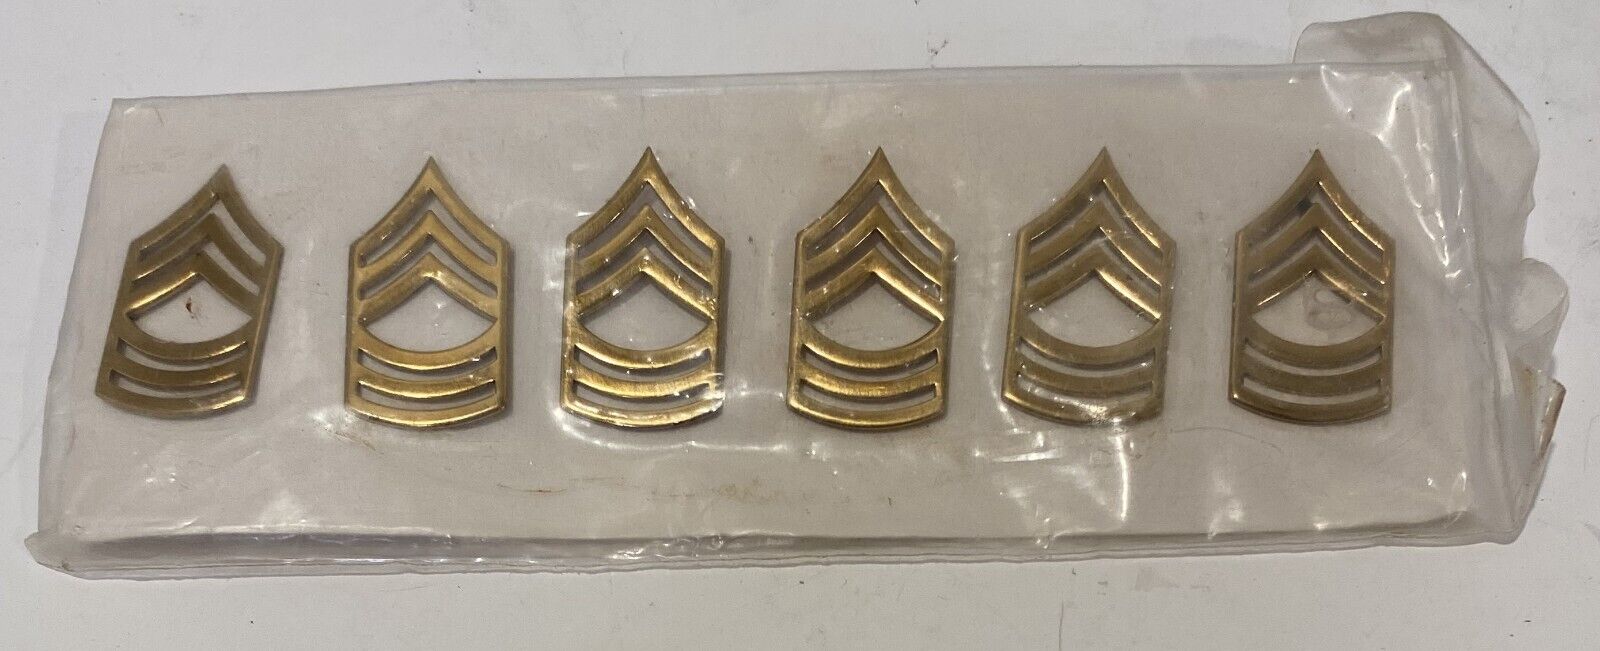 US Army Master Sergeant E8 Polished Brass Rank Insignia - 3 Pair New